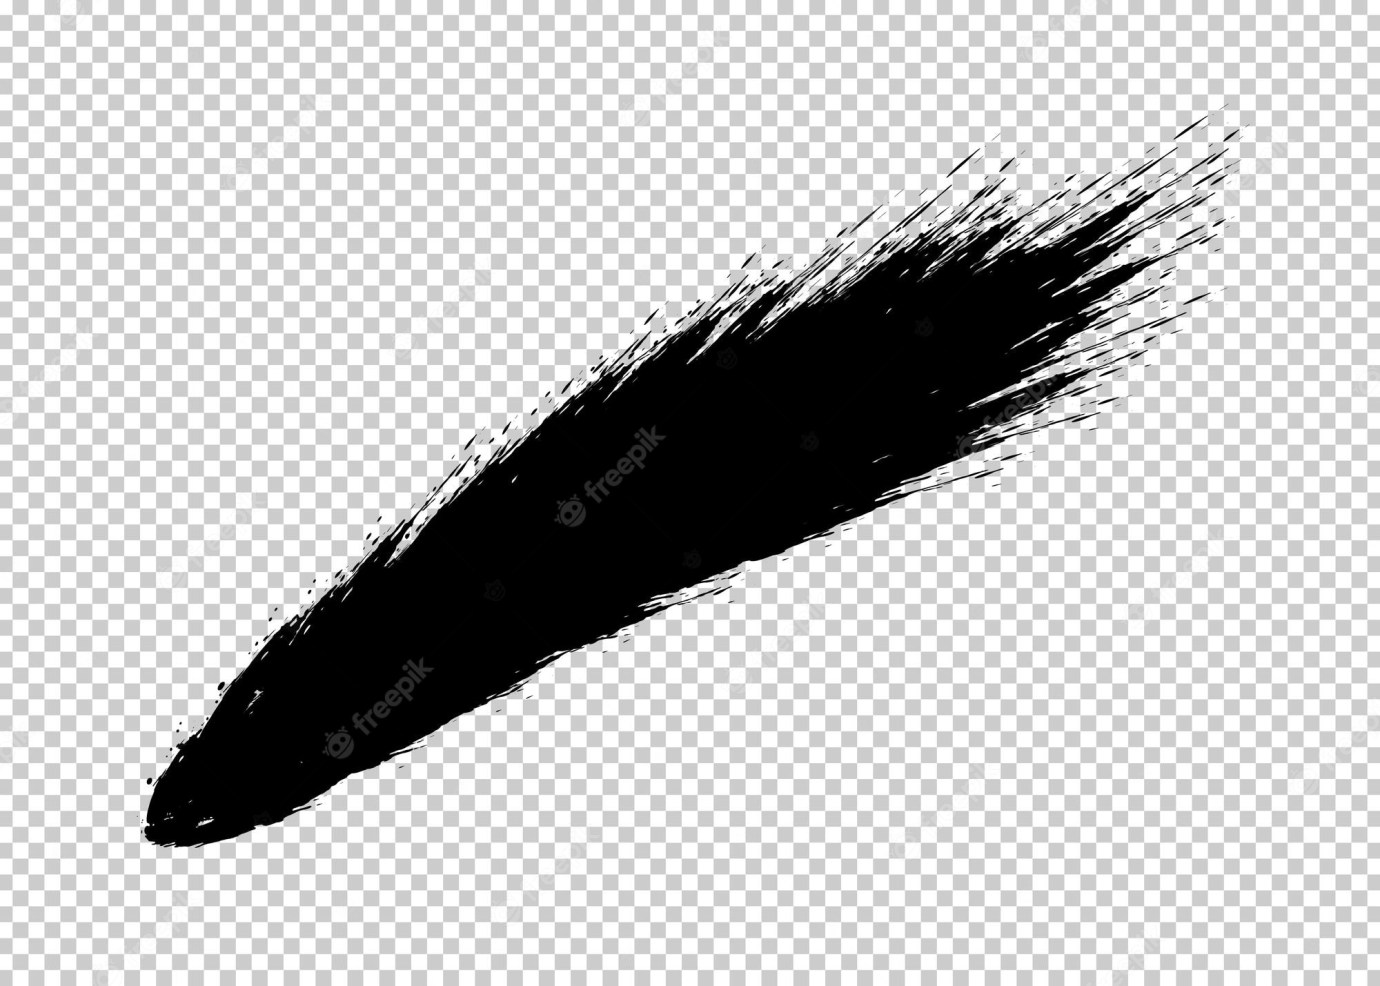 Picture of: Brush Stroke Png Images – Free Download on Freepik